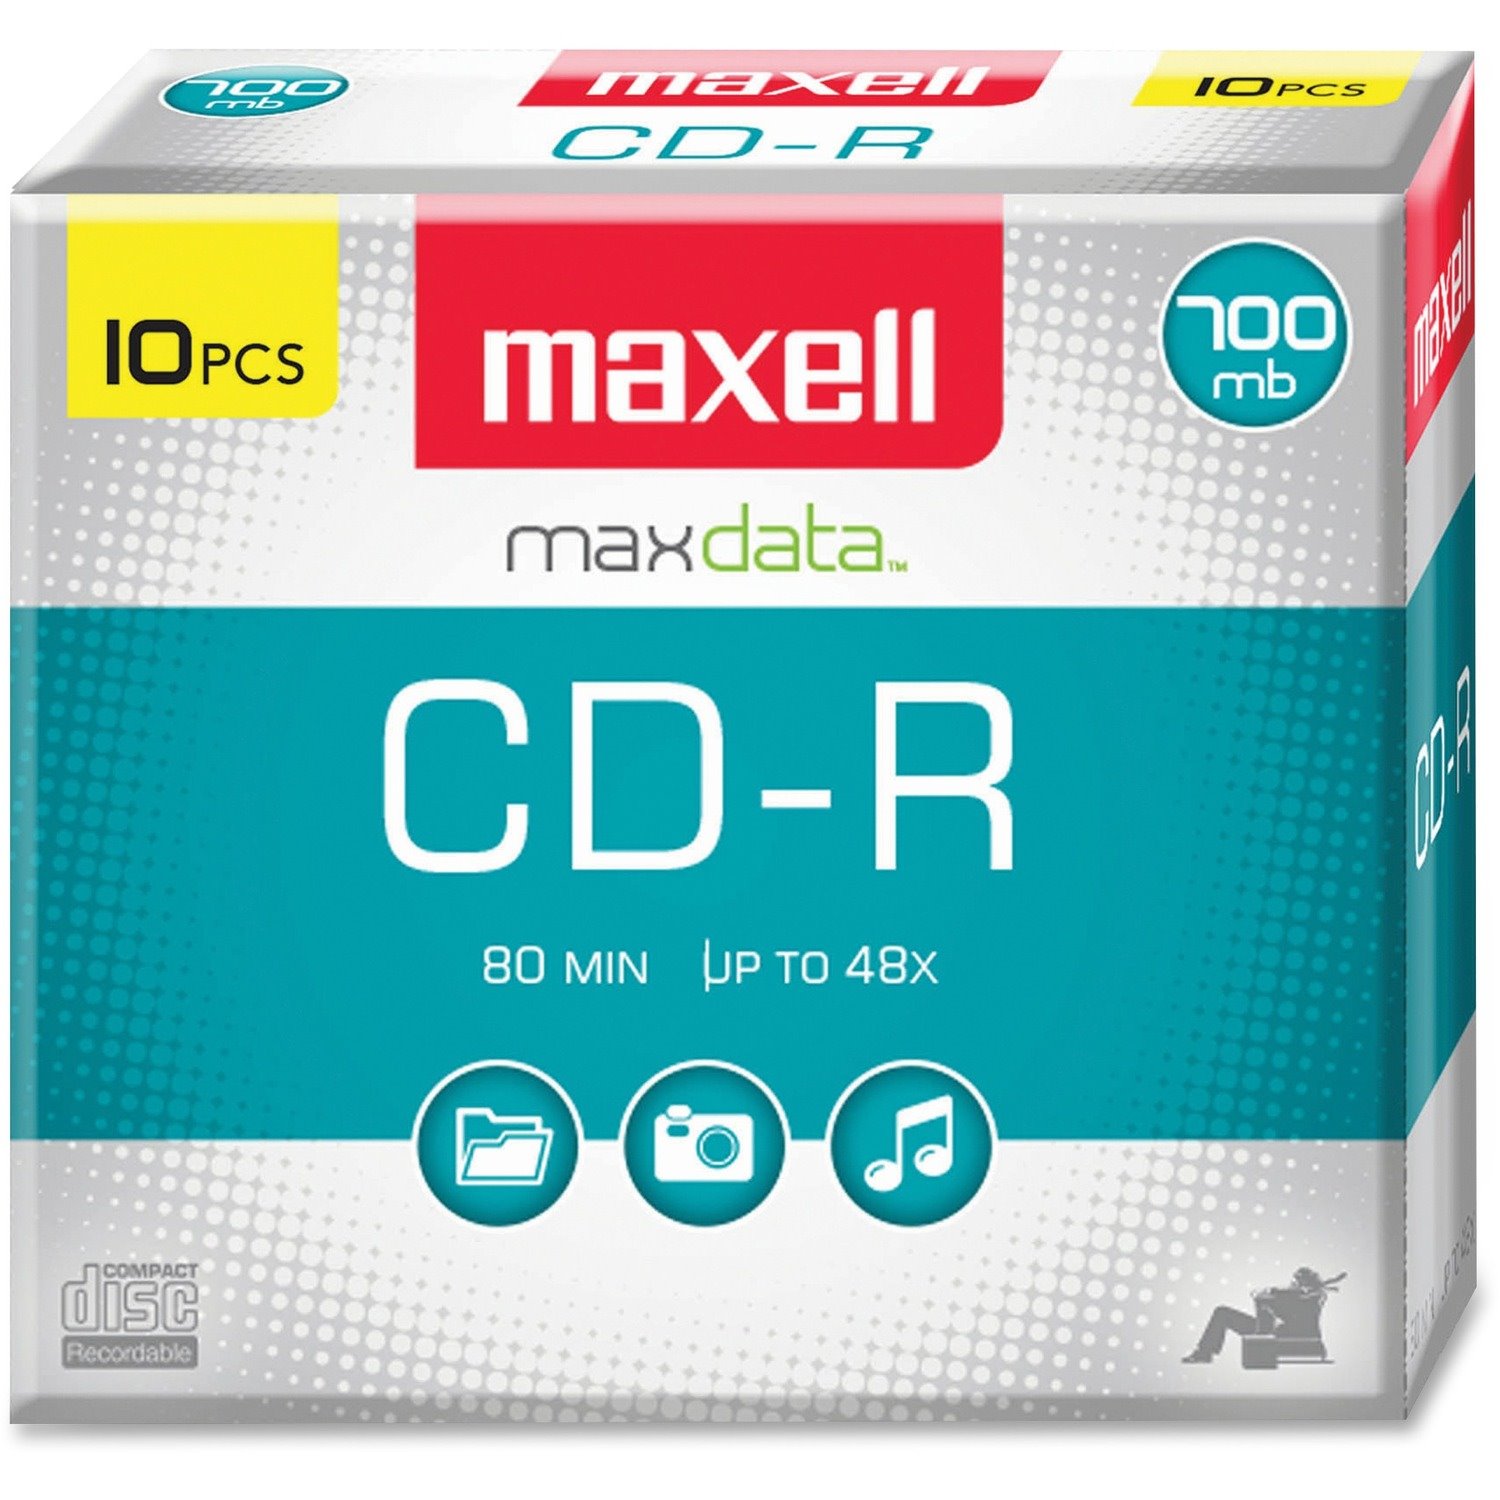 Maxell CD Recordable Media - CD-R - 40x - 700 MB - 10 Pack Slim Jewel Case